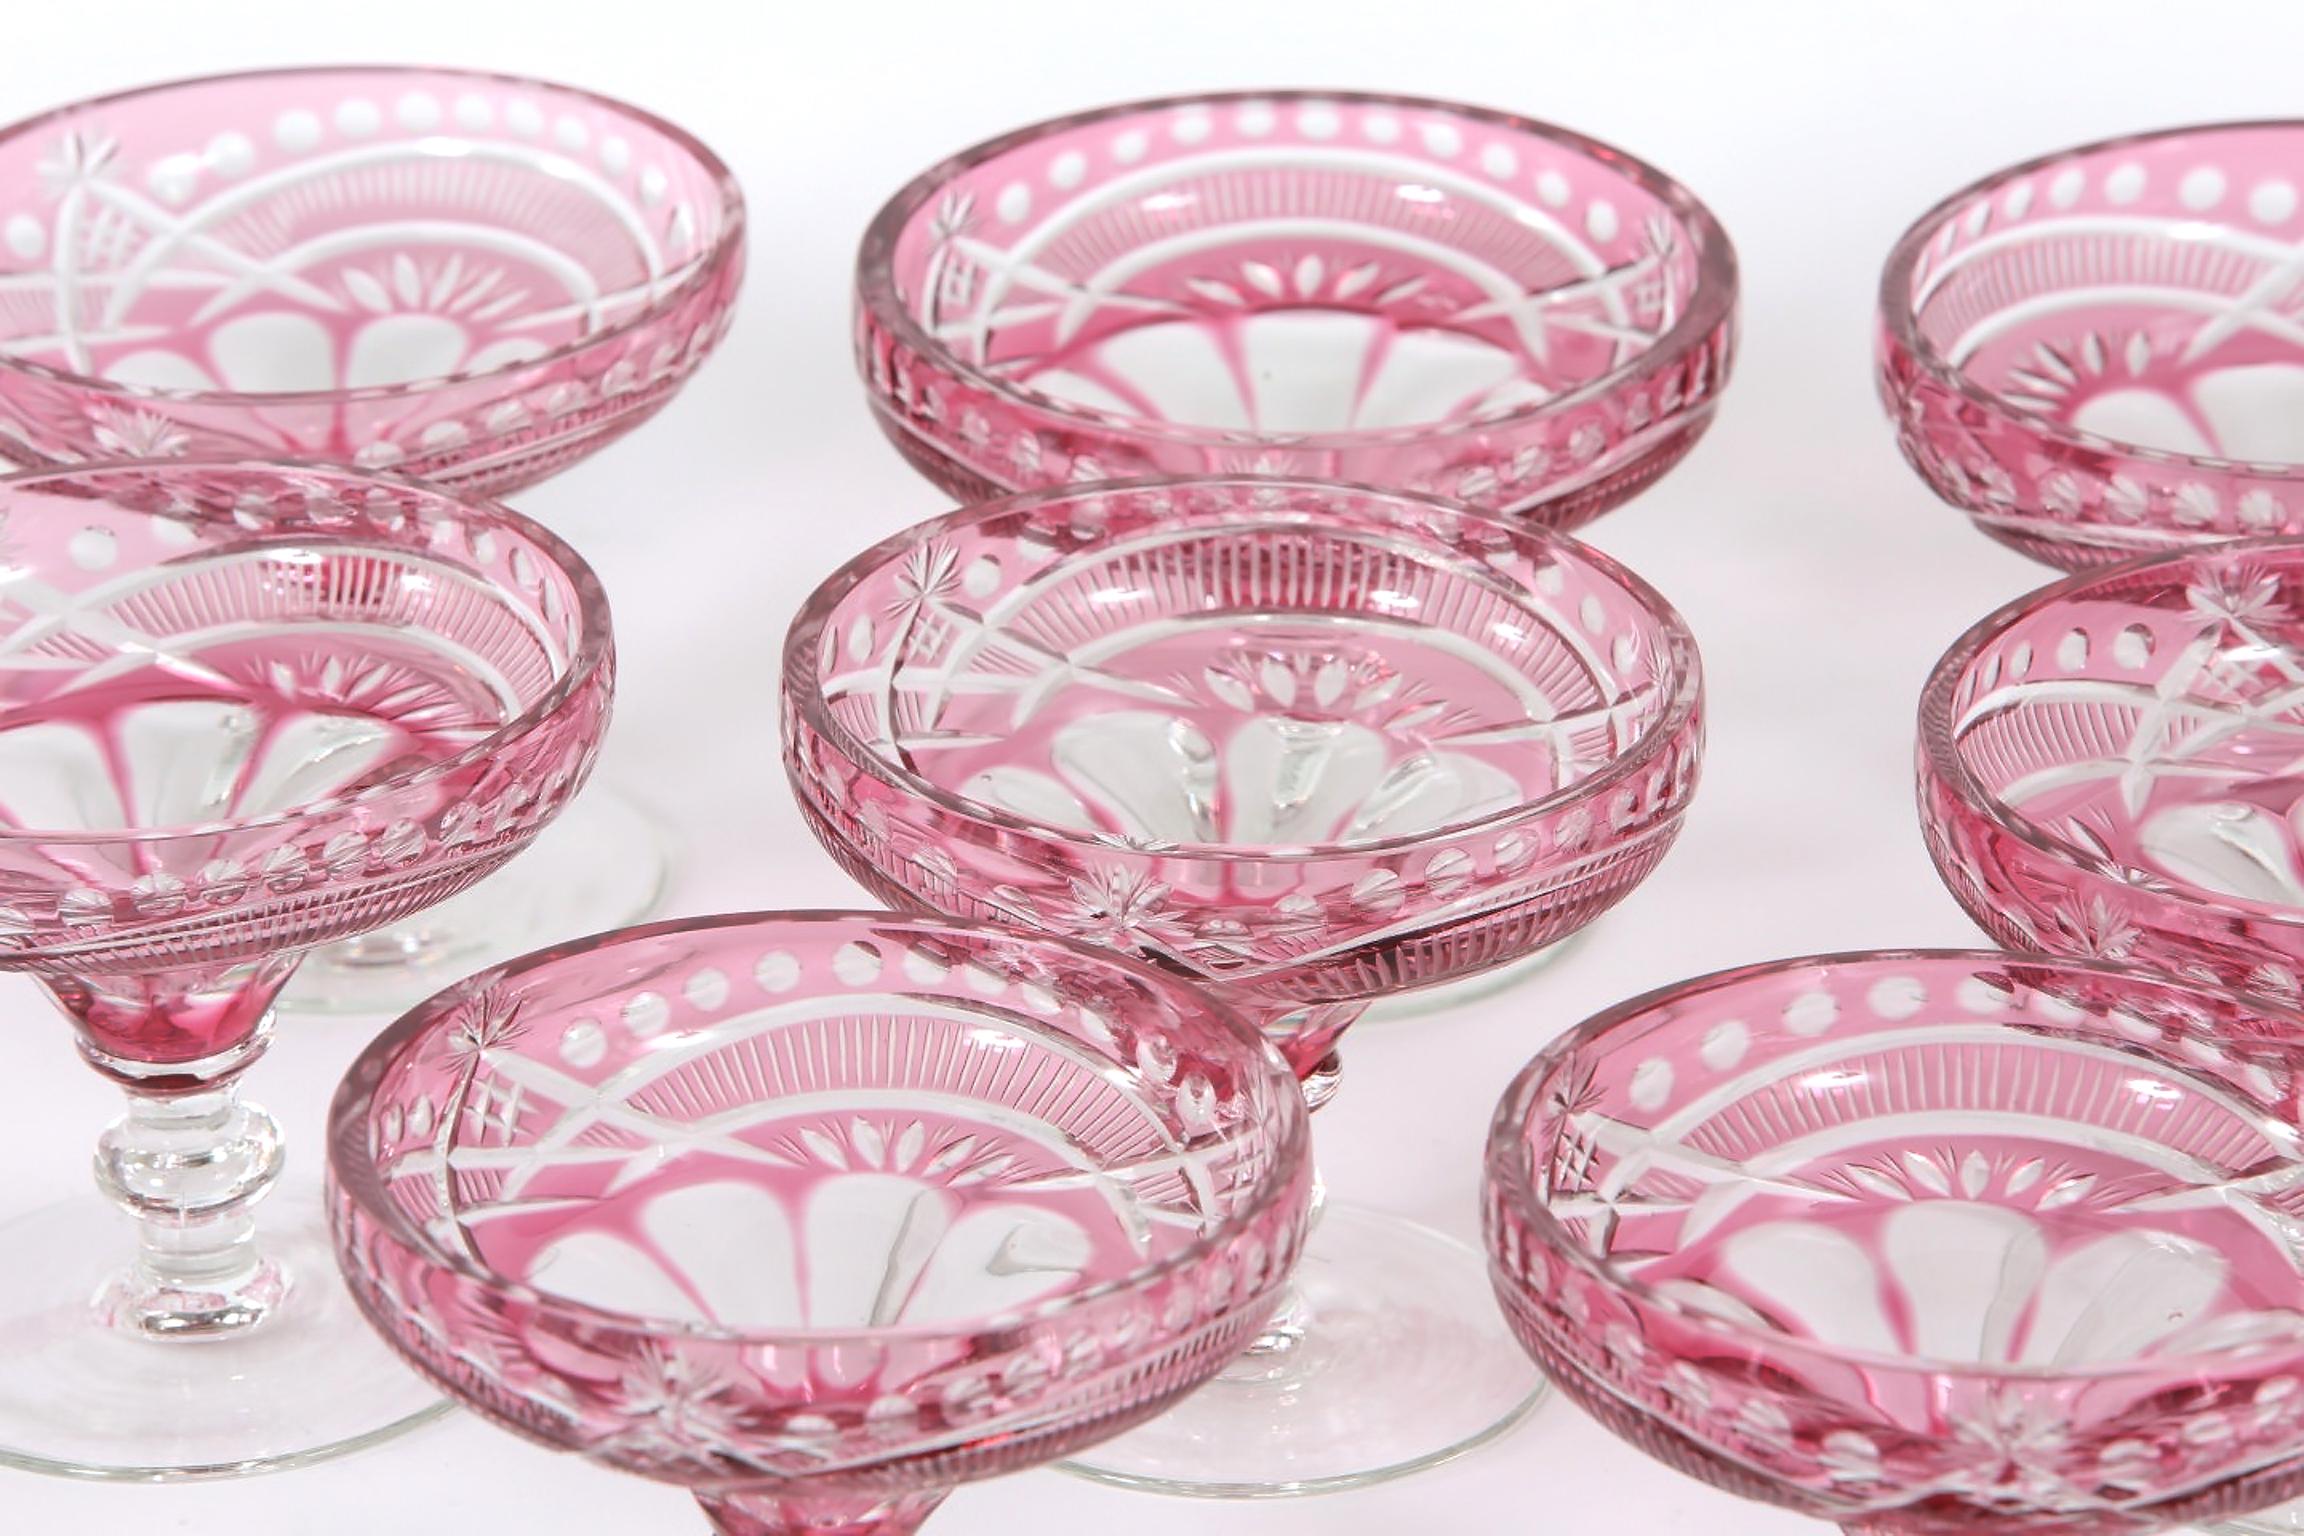 Early 20th century cut crystal barware / tableware drinking coupe service for twelve people. Each coupe is in excellent condition. Each one Stand about 4.5 inches x 4 inches.